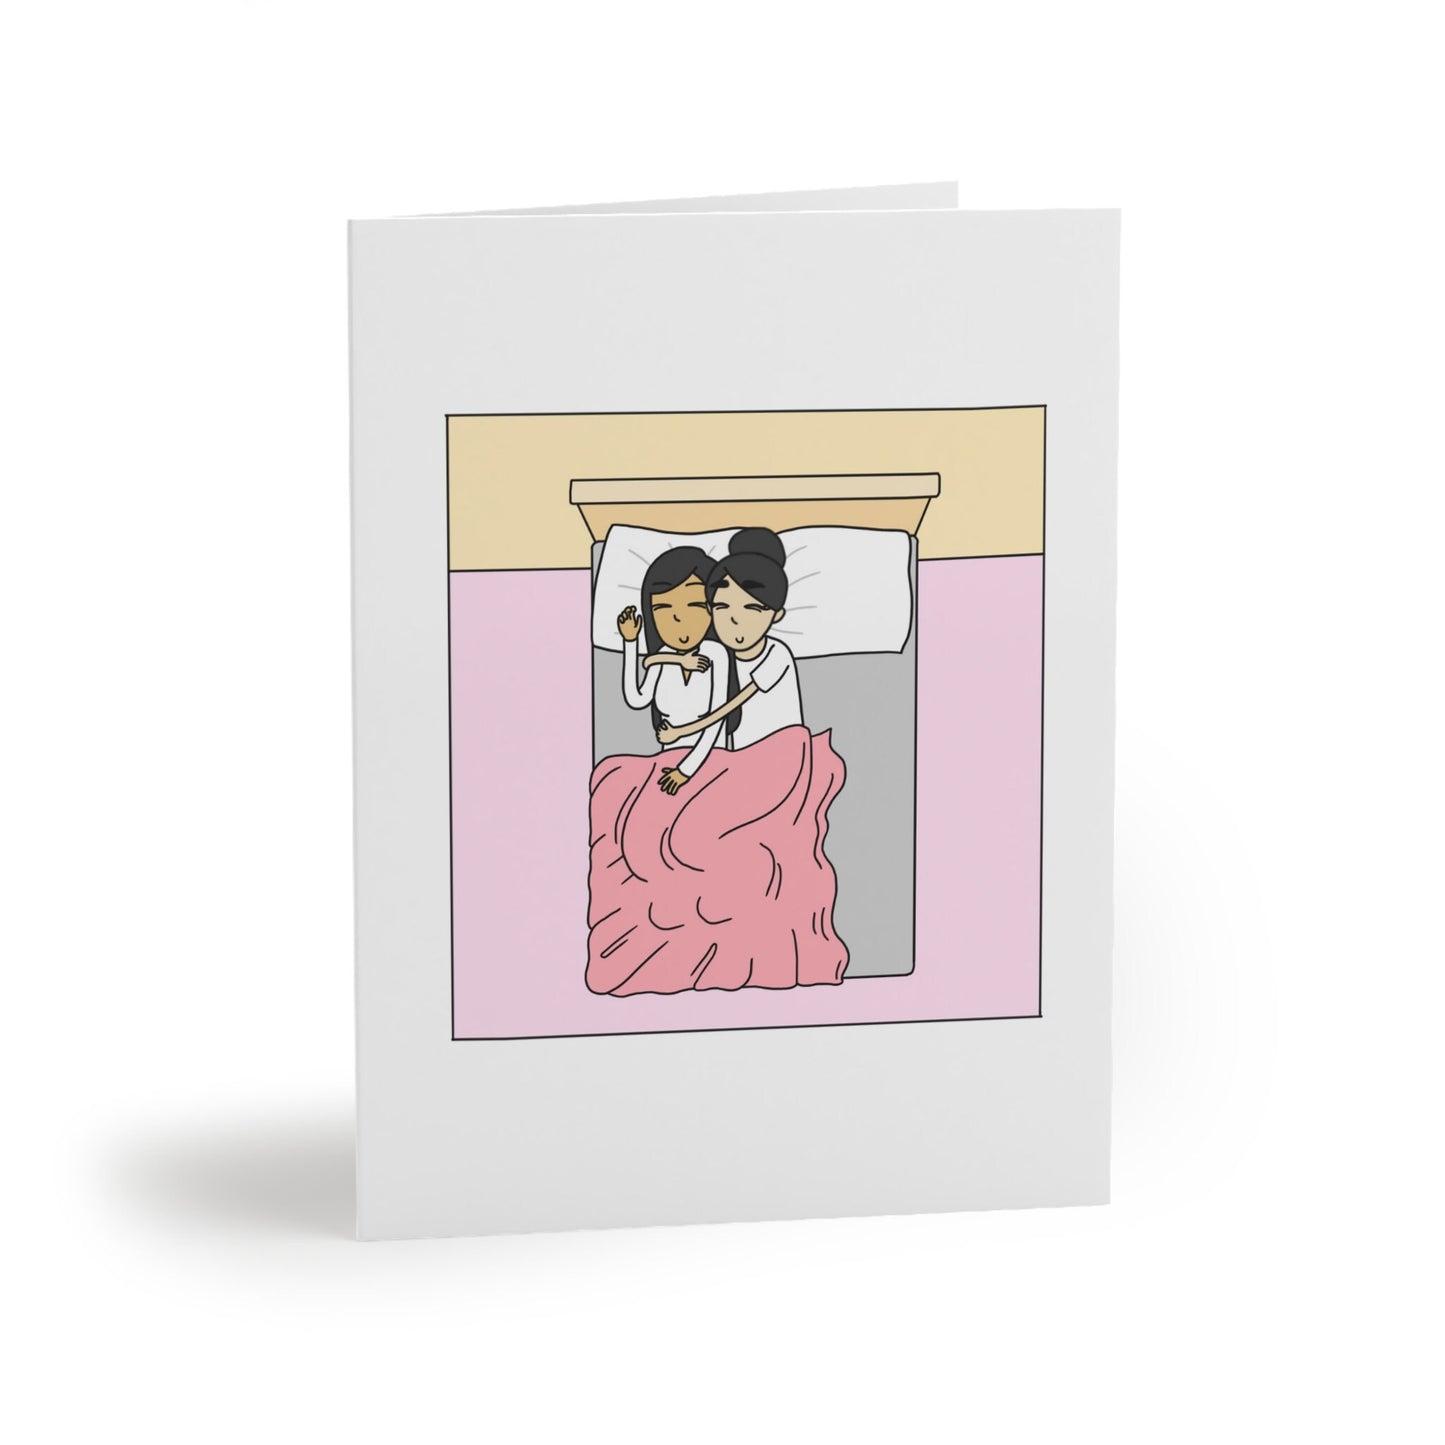 Lesbian Greeting Card & Comic Book Bundle Gift Set | LGBTQ Valentine's Day Gifts | Sapphic Romantic WLW Anniversary, Birthday, Holiday Cards